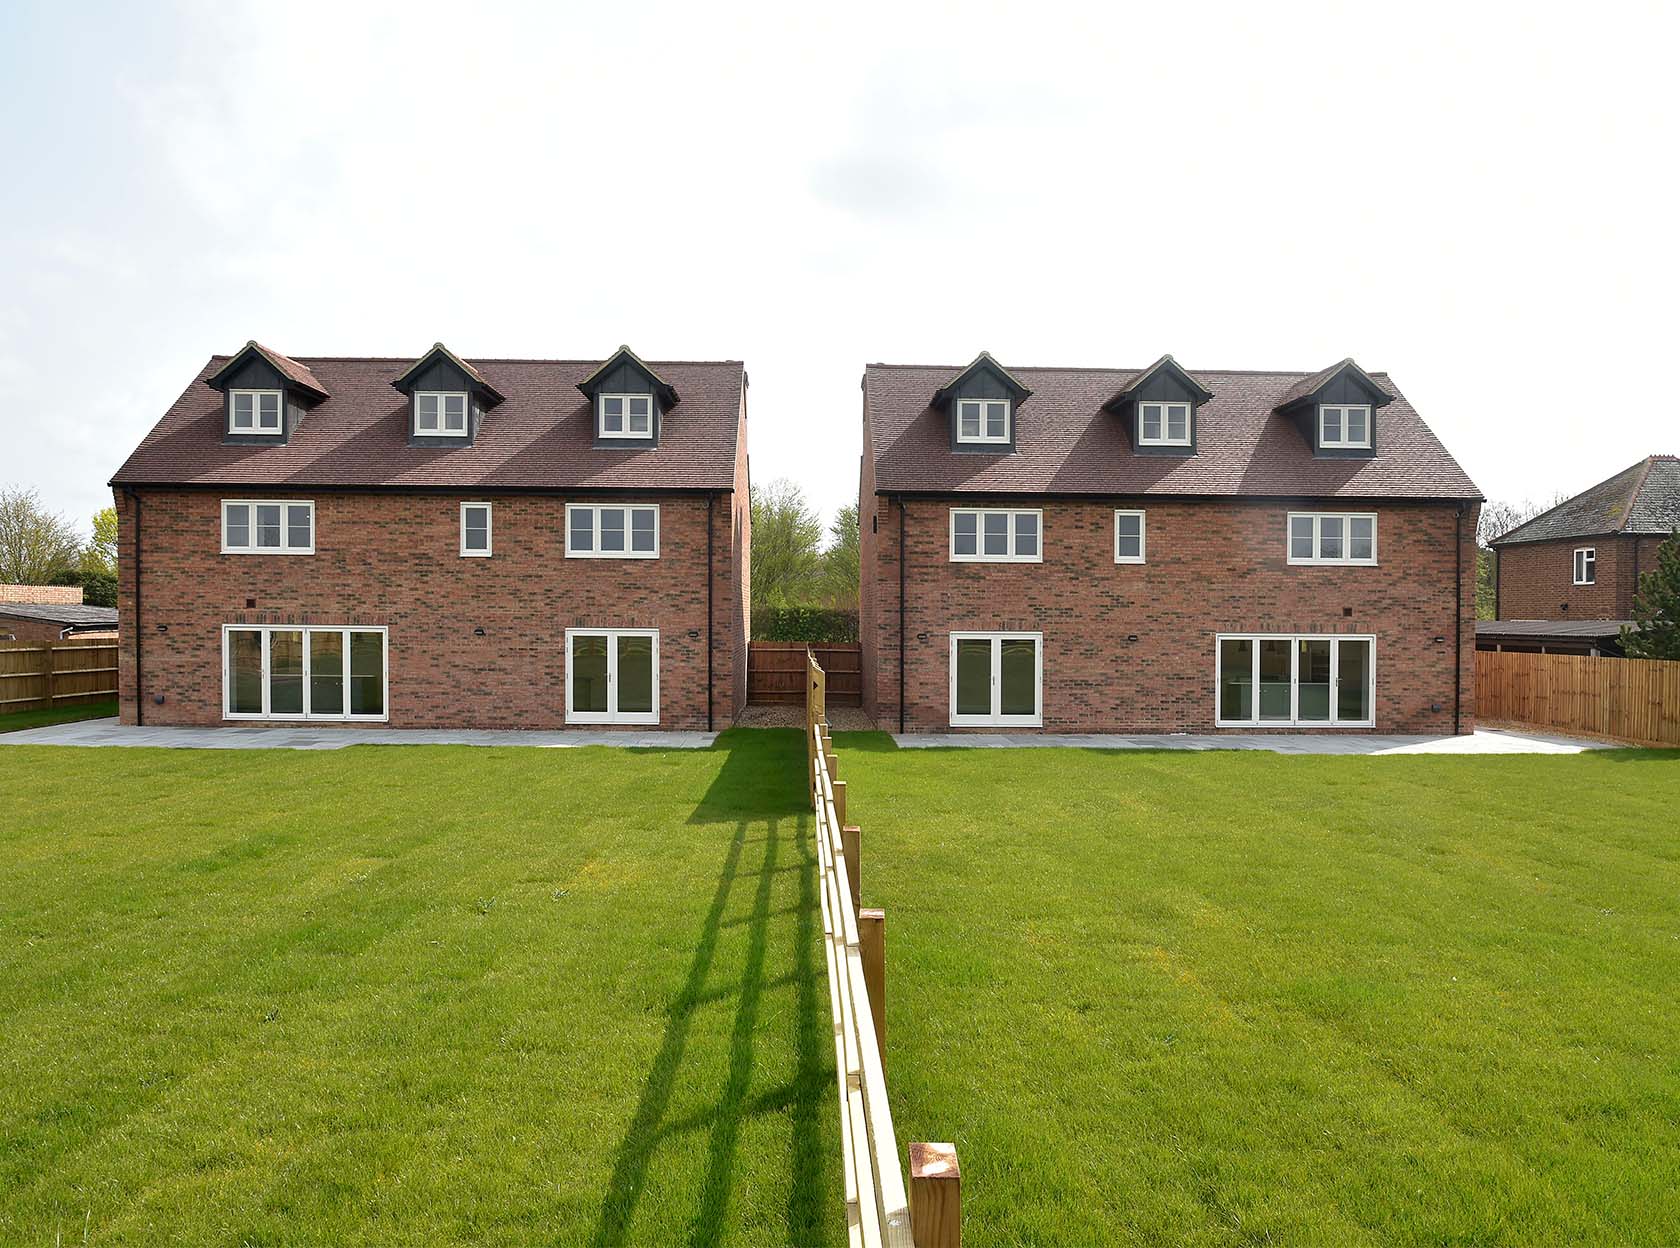 Two symmetrical new properties in rural Bedfordshire